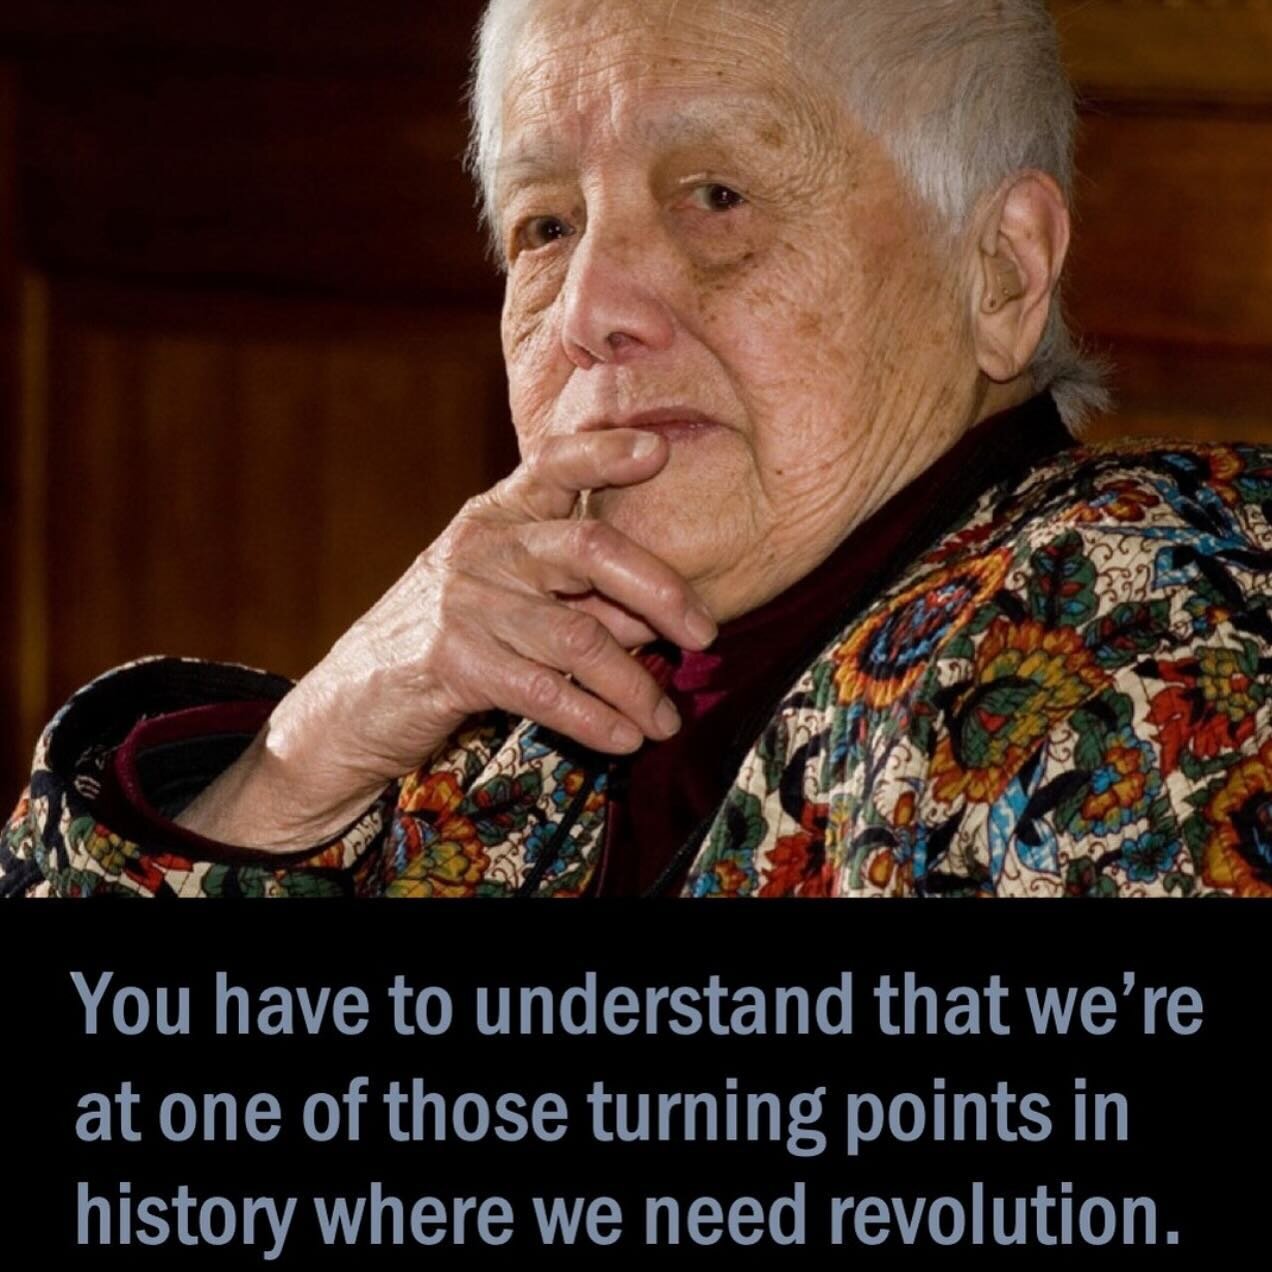 WE WANT TO HEAR FROM YOU! Please see the new website of the James and Grace Lee Boggs Foundation, which is managed by longtime associates and family of Jimmy and Grace based on directives Grace provided to continue their visionary legacy. https://www